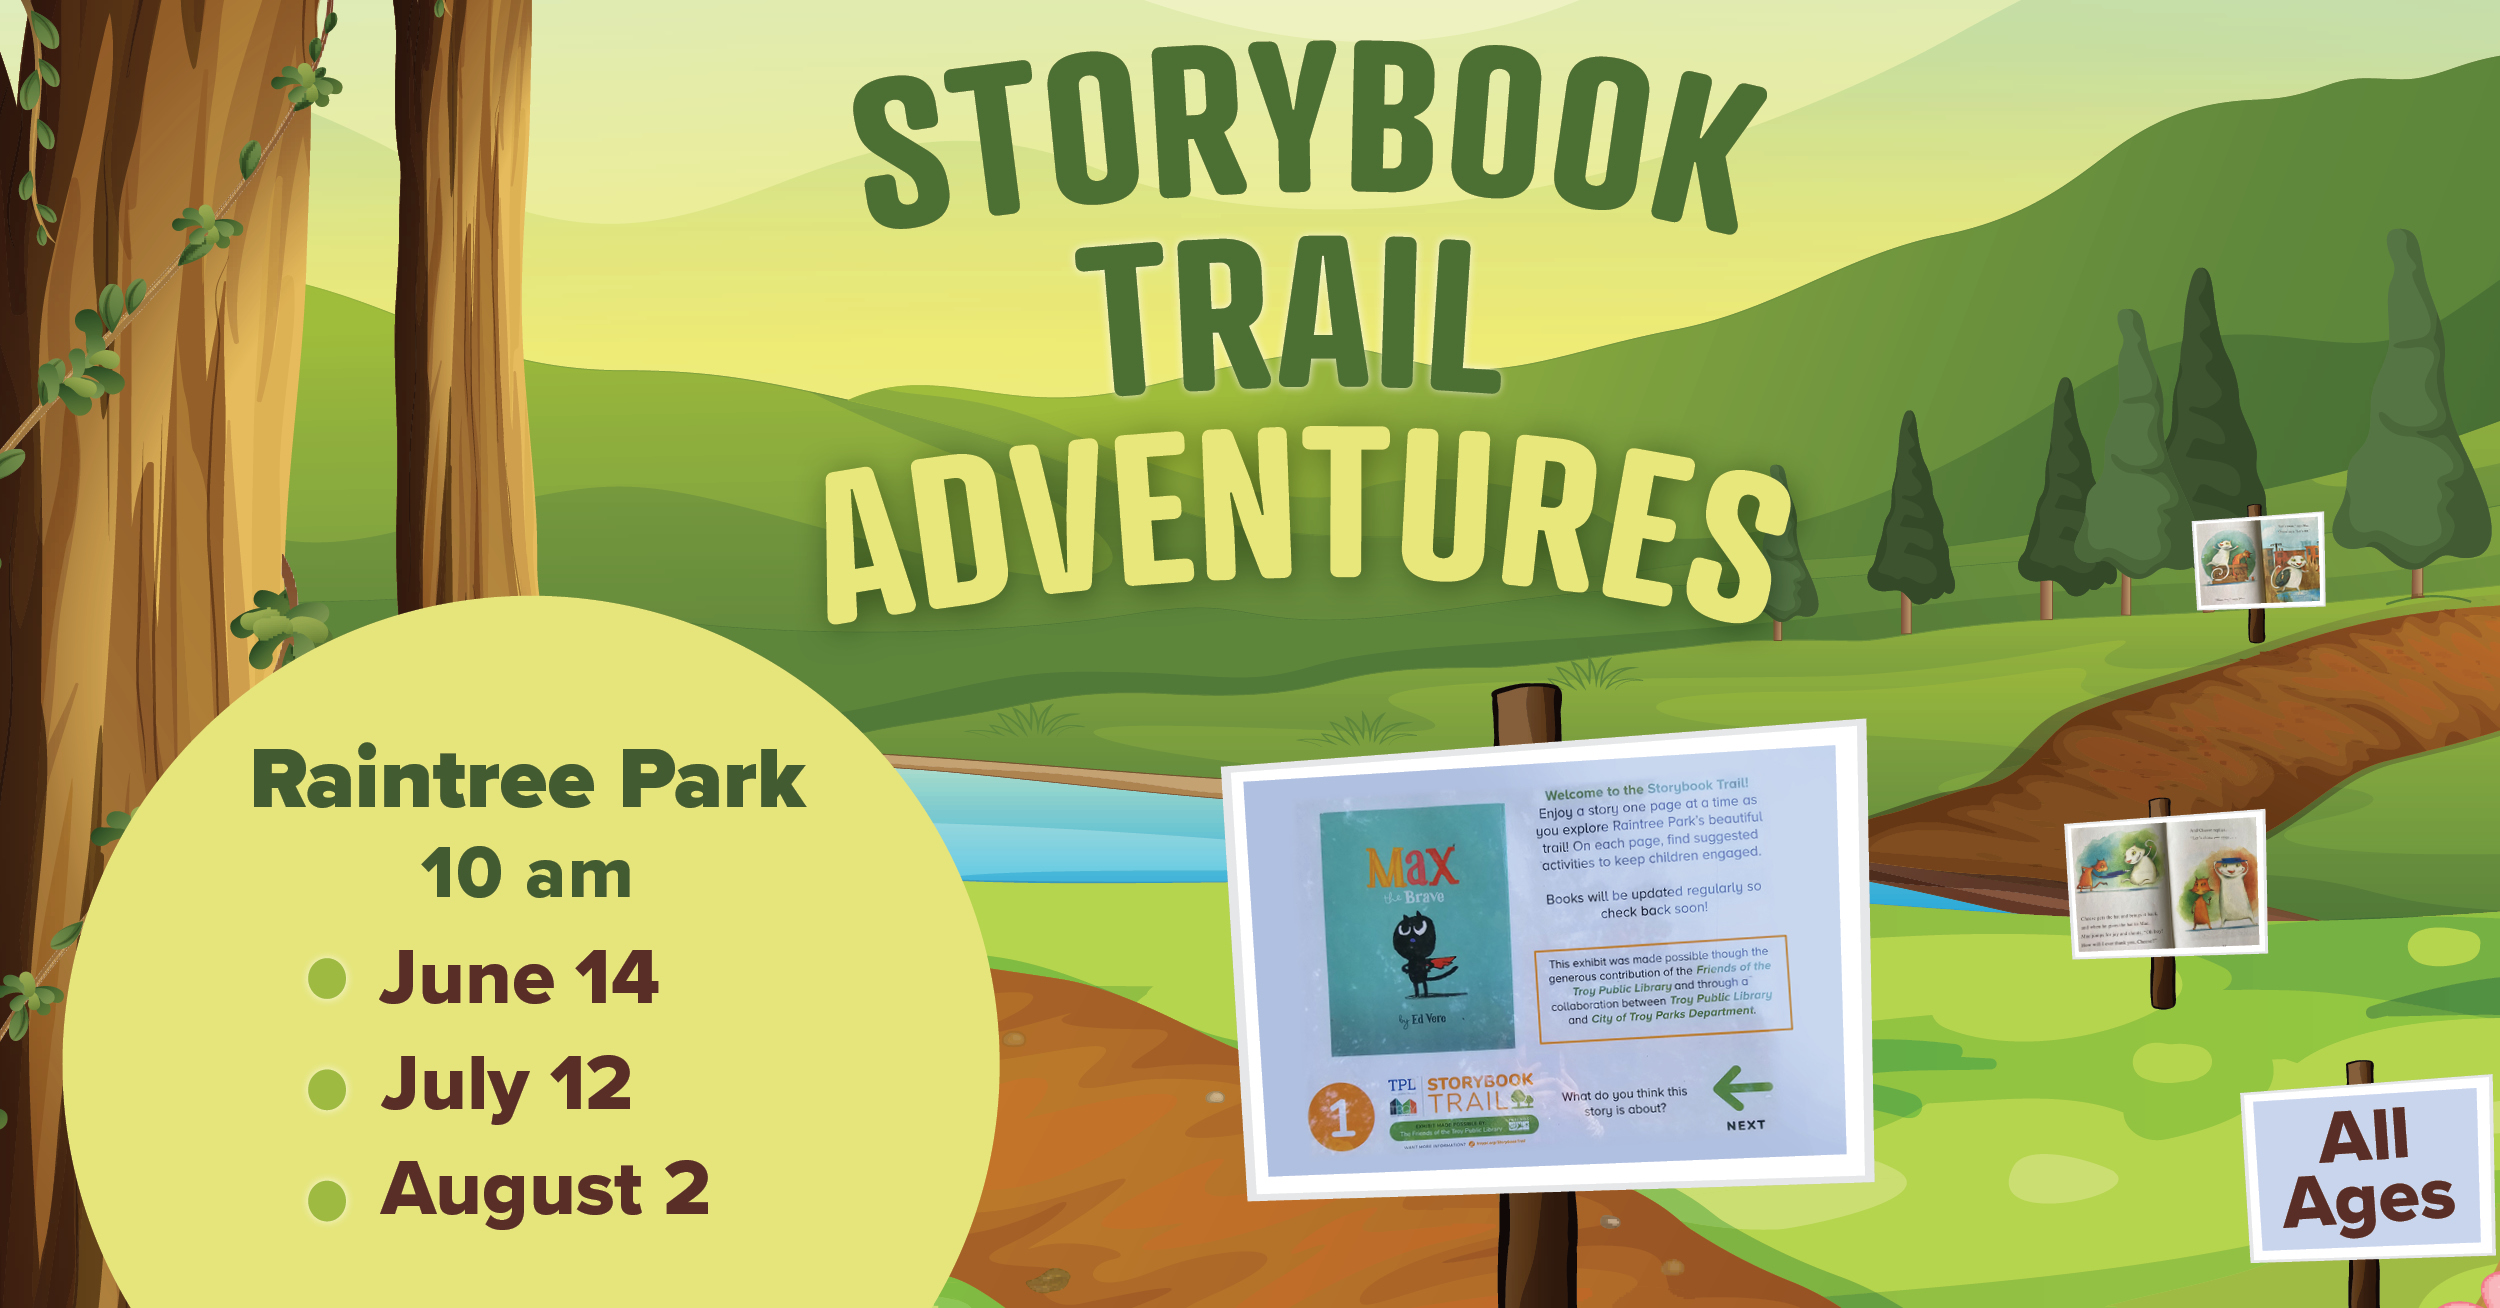 Storybook Trail Adventures Raintree Park. Ten am. June fourteenth, July twelfth, August second. All ages